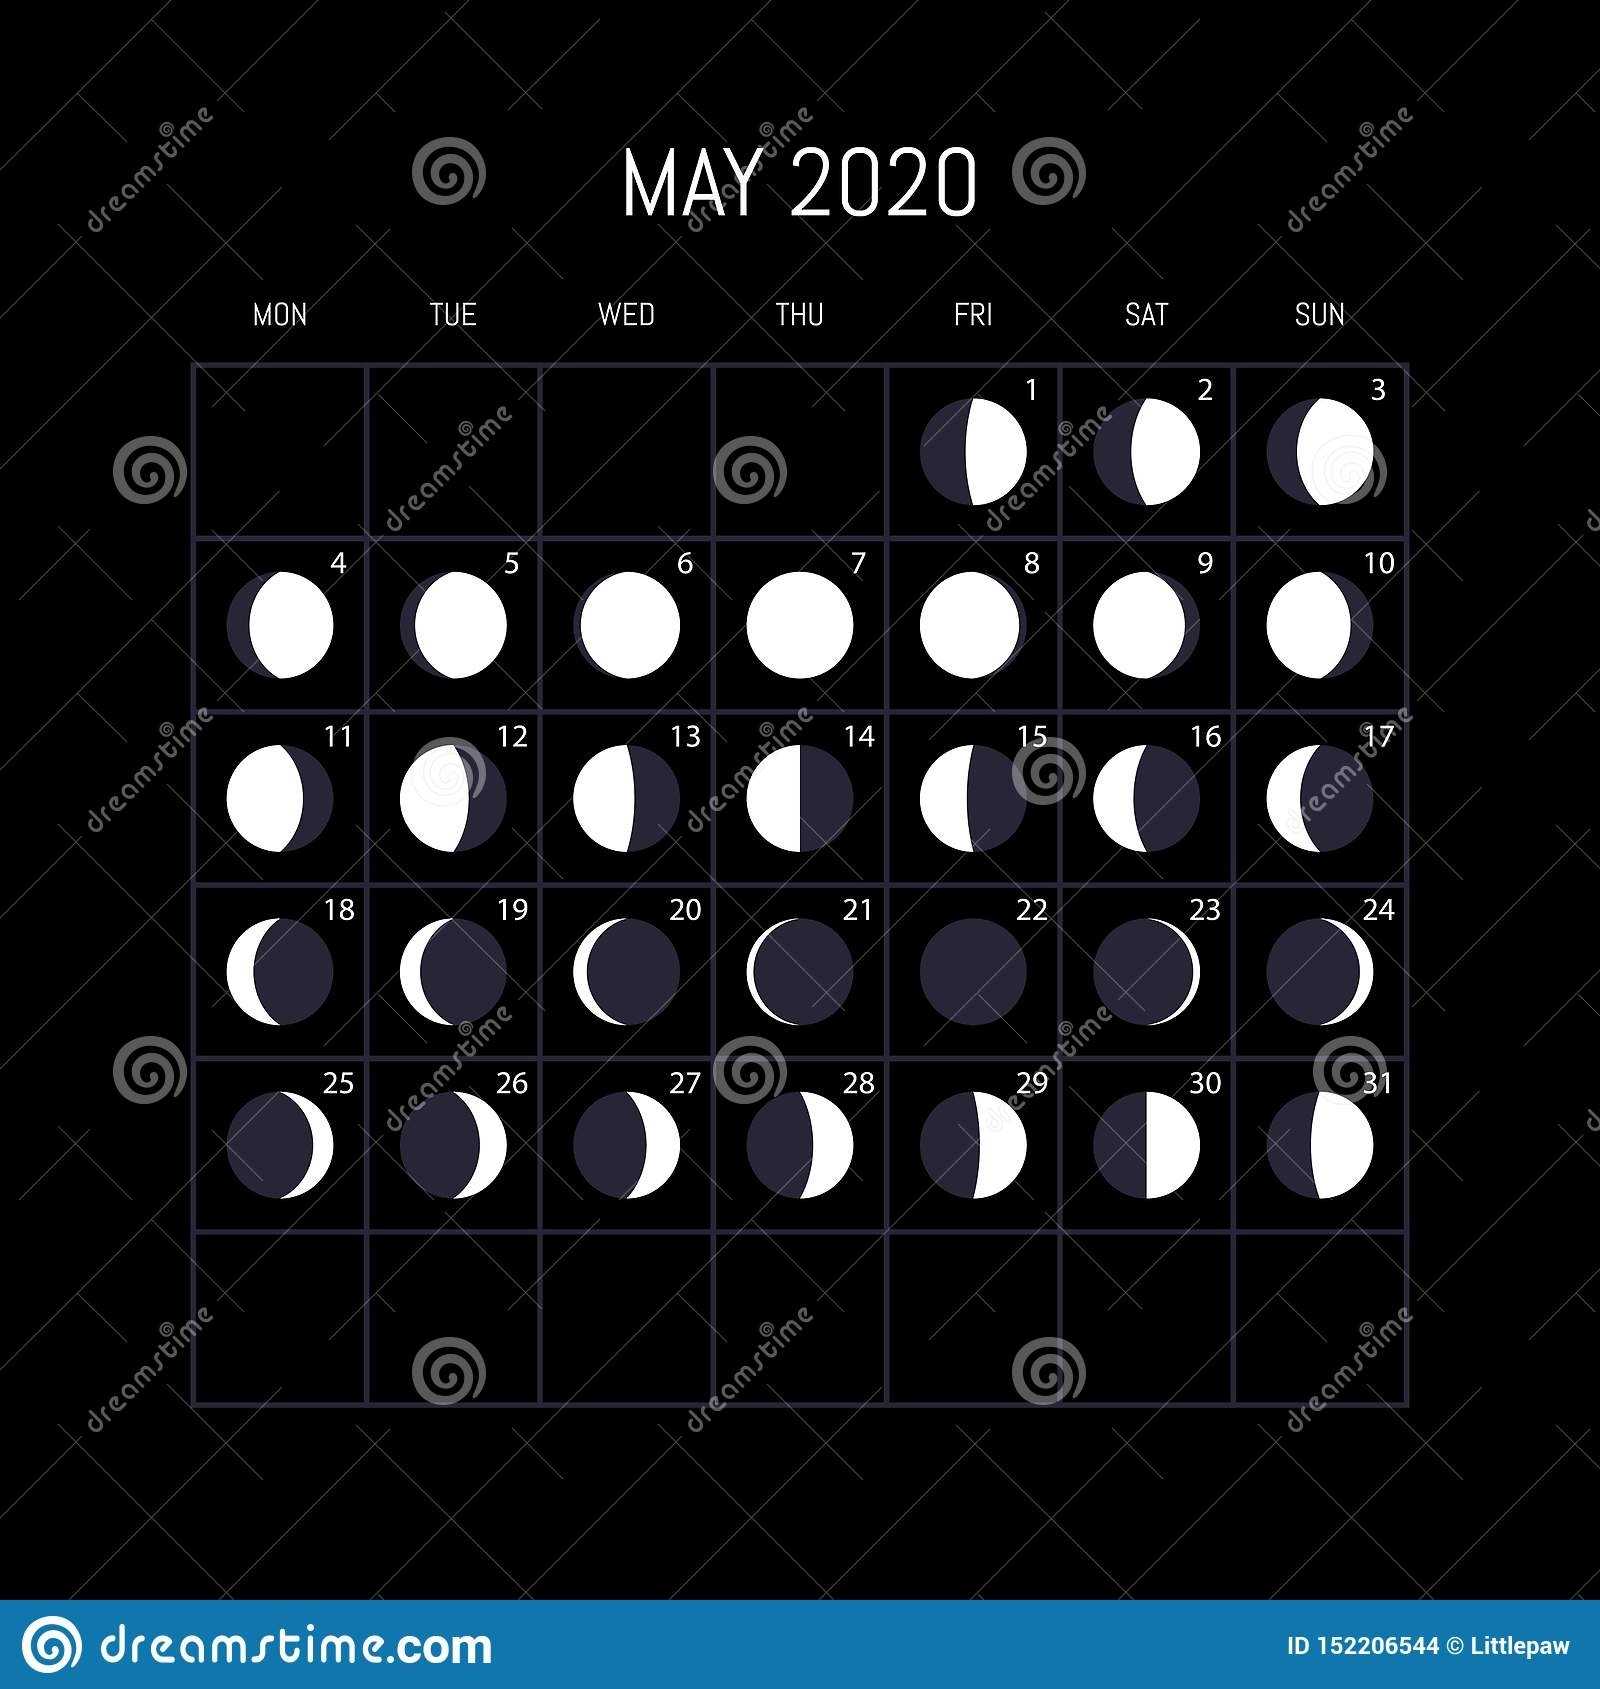 Moon Phases Calendar For 2020 Year. May. Night Background Design 2020 Calendar With Moon Phases